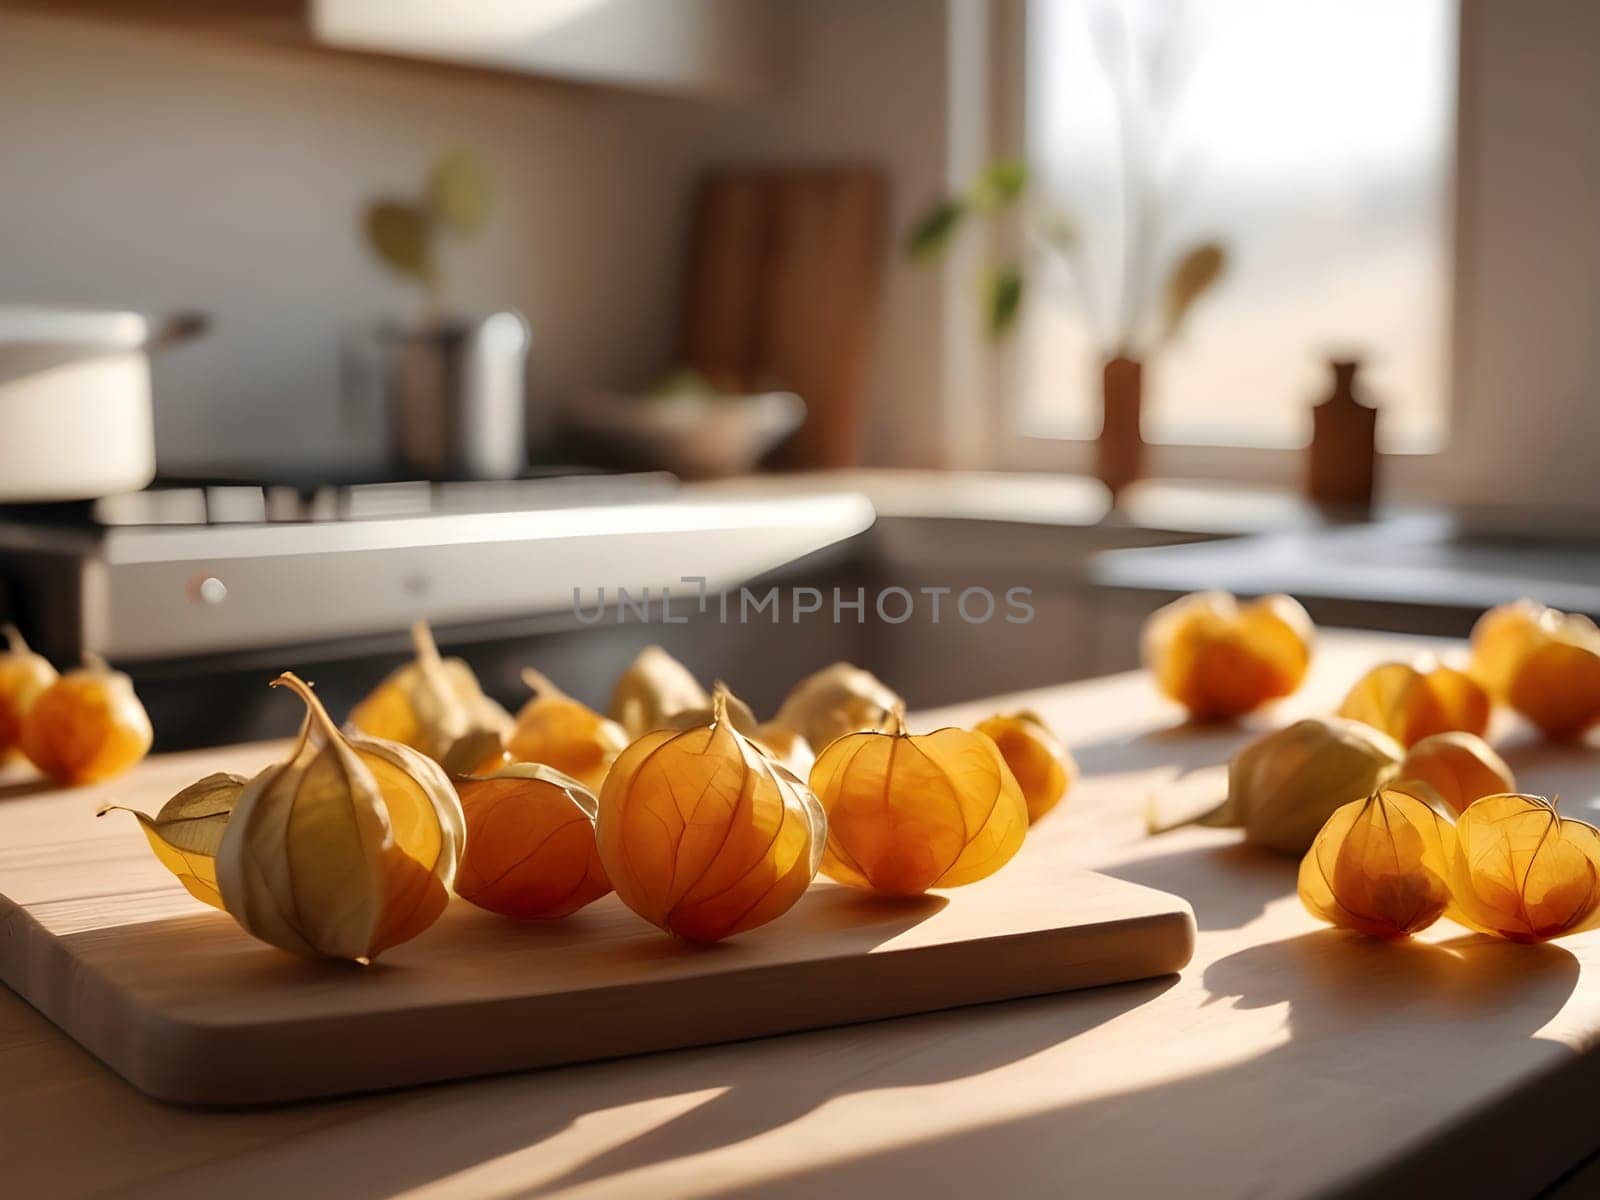 Golden Hour Culinary: Physalis on a Wooden Board in a Sunlit Kitchen by mailos